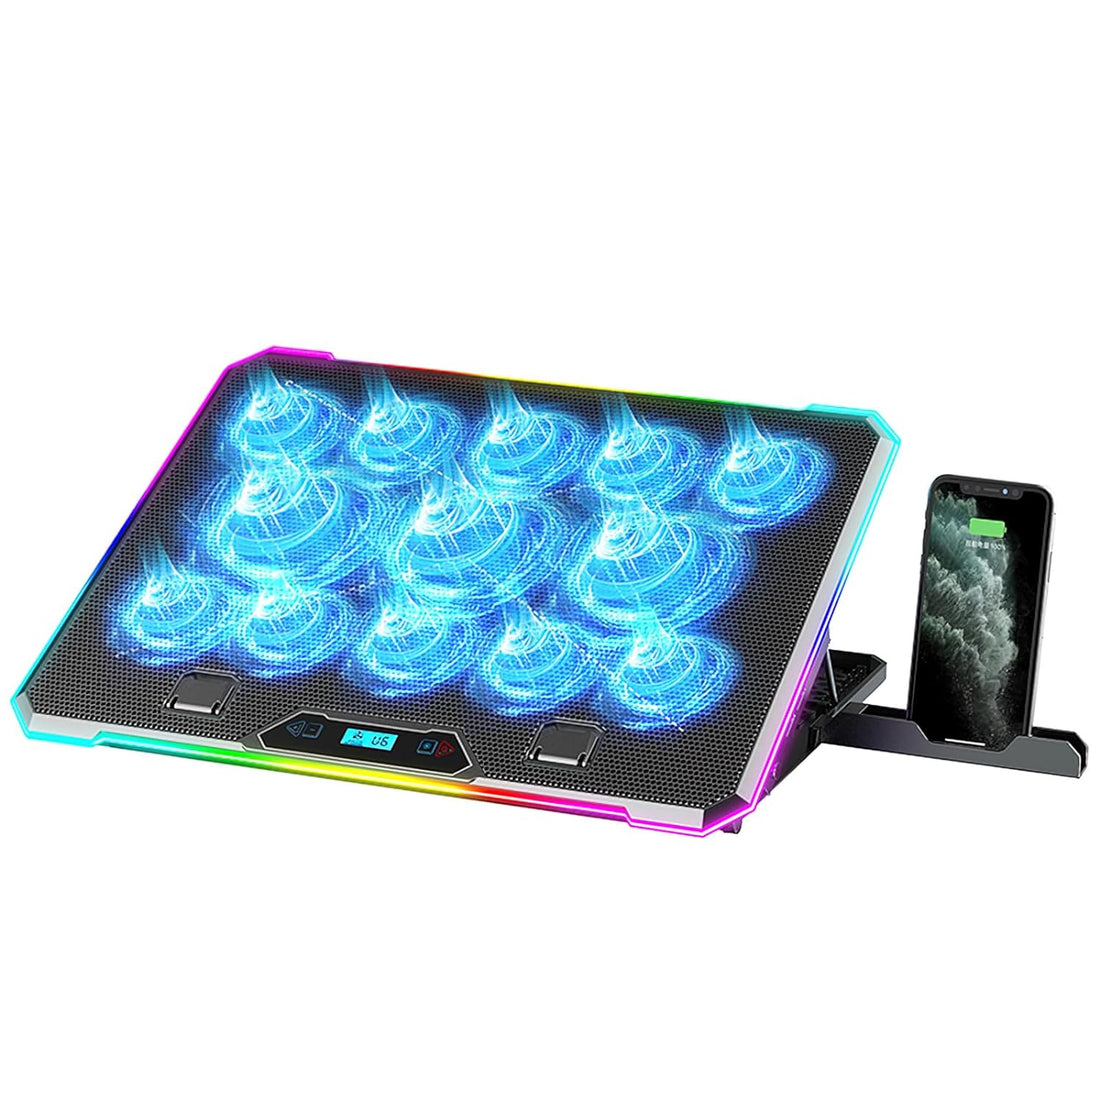 KYOLLY RGB Laptop Cooling Pad Gaming Laptop Cooler, Laptop Fan Cooling Stand with 13 Quiet Cooling Fans for 15.6-17.3 inch laptops, 9 Height Stand, LED Lights & LCD Screen, 2 USB Ports, Lap Desk Use